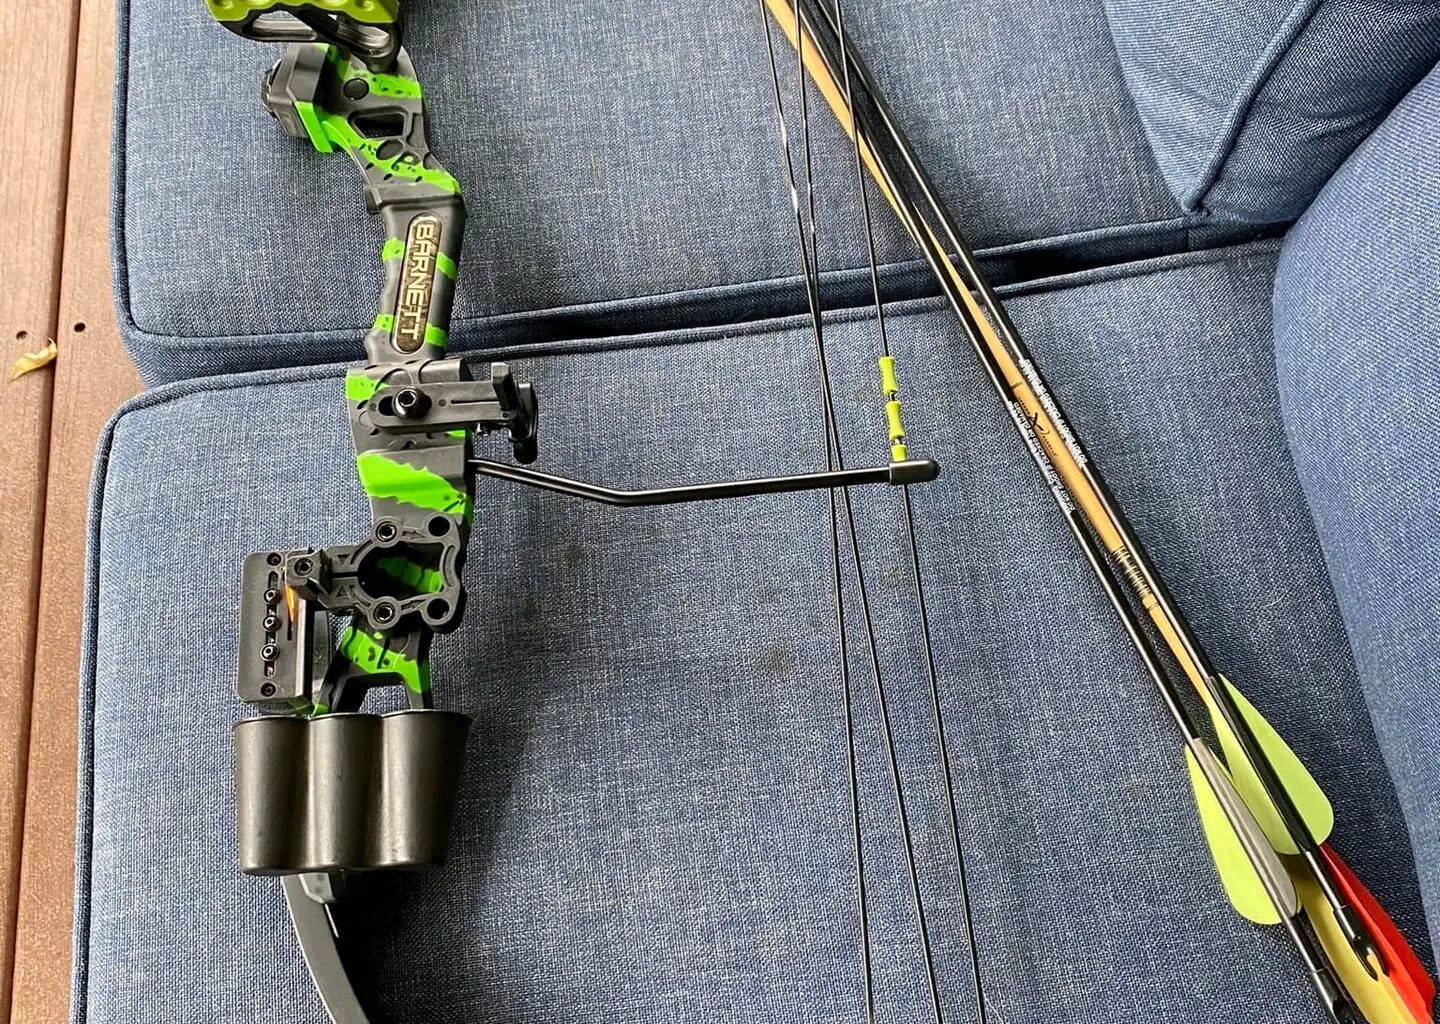 Youth Compound Bow